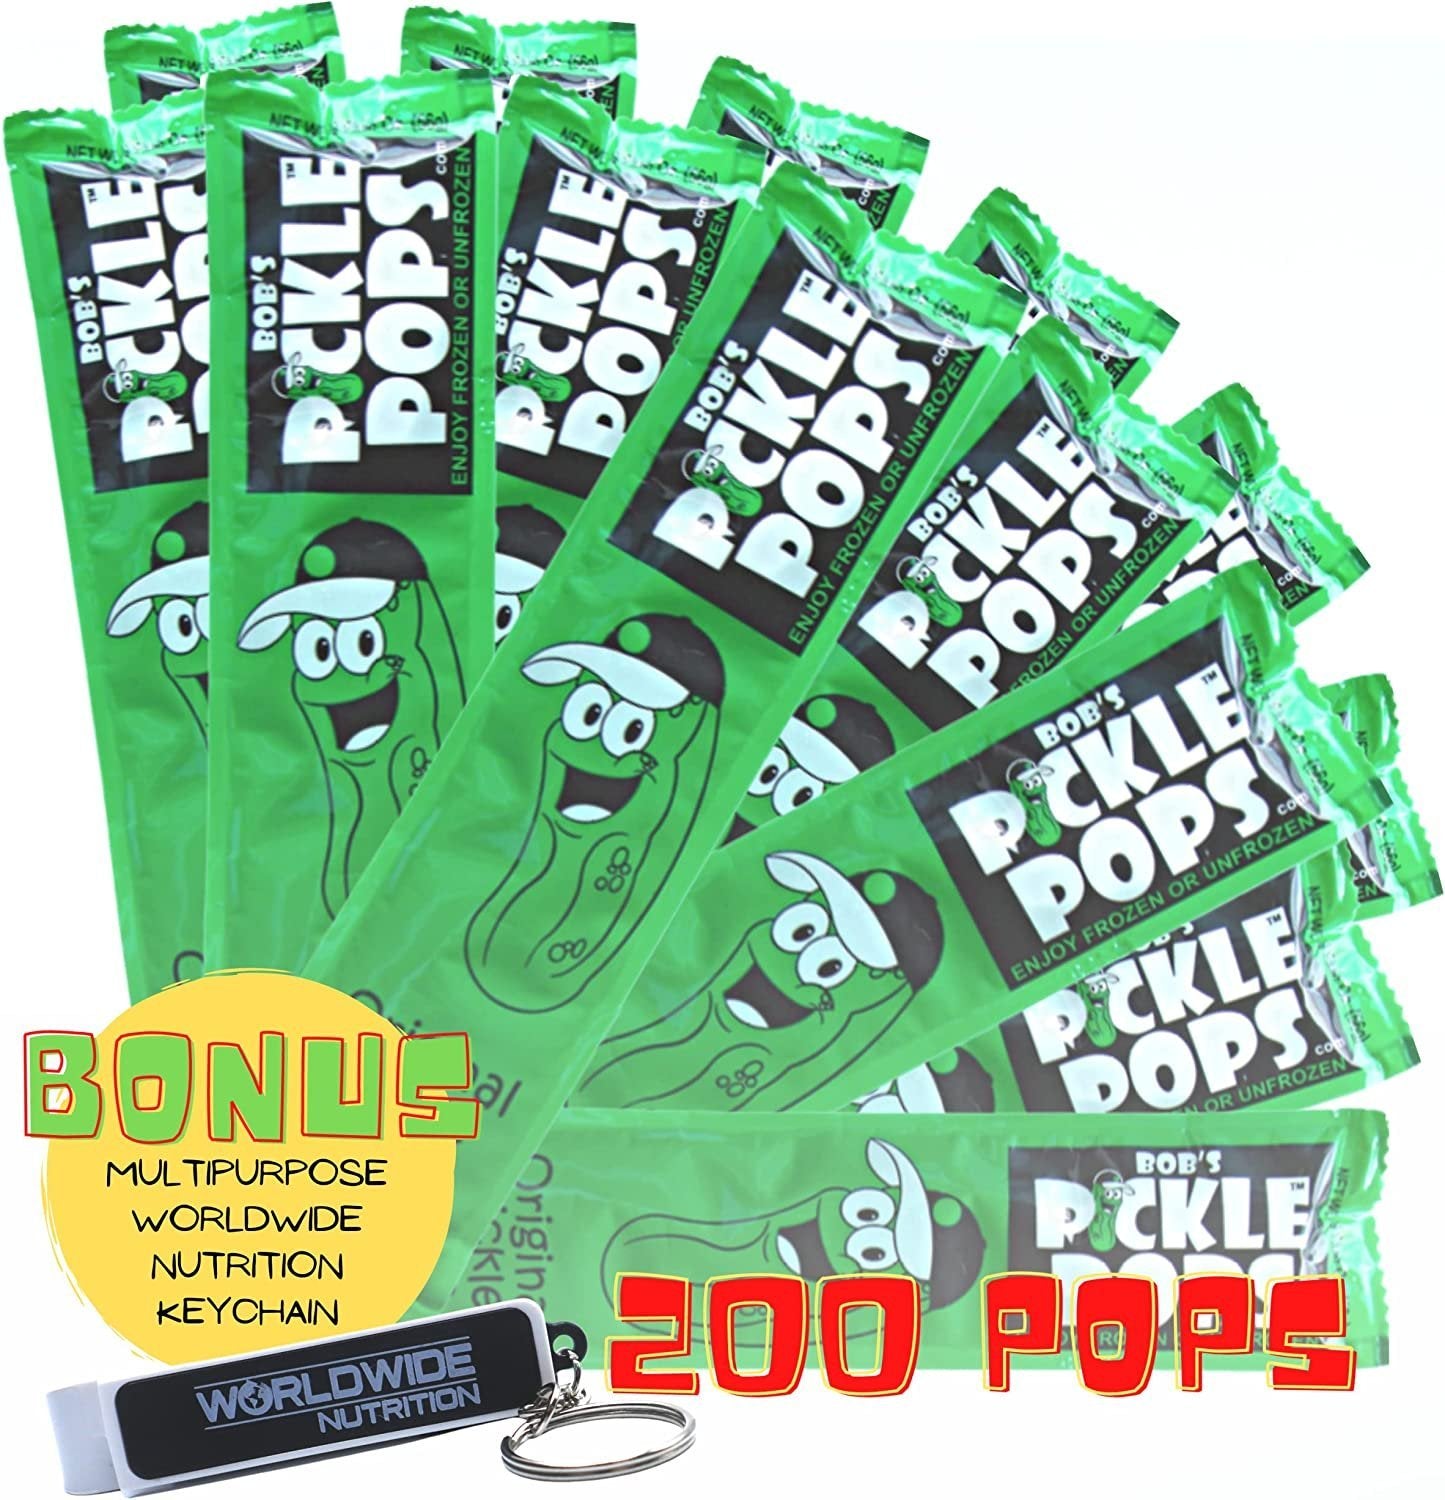 Bob's Pickle Pops Sport - Original Dill - For Hydration and Cramp Relief - Pickle Juice Popsicle Sticks